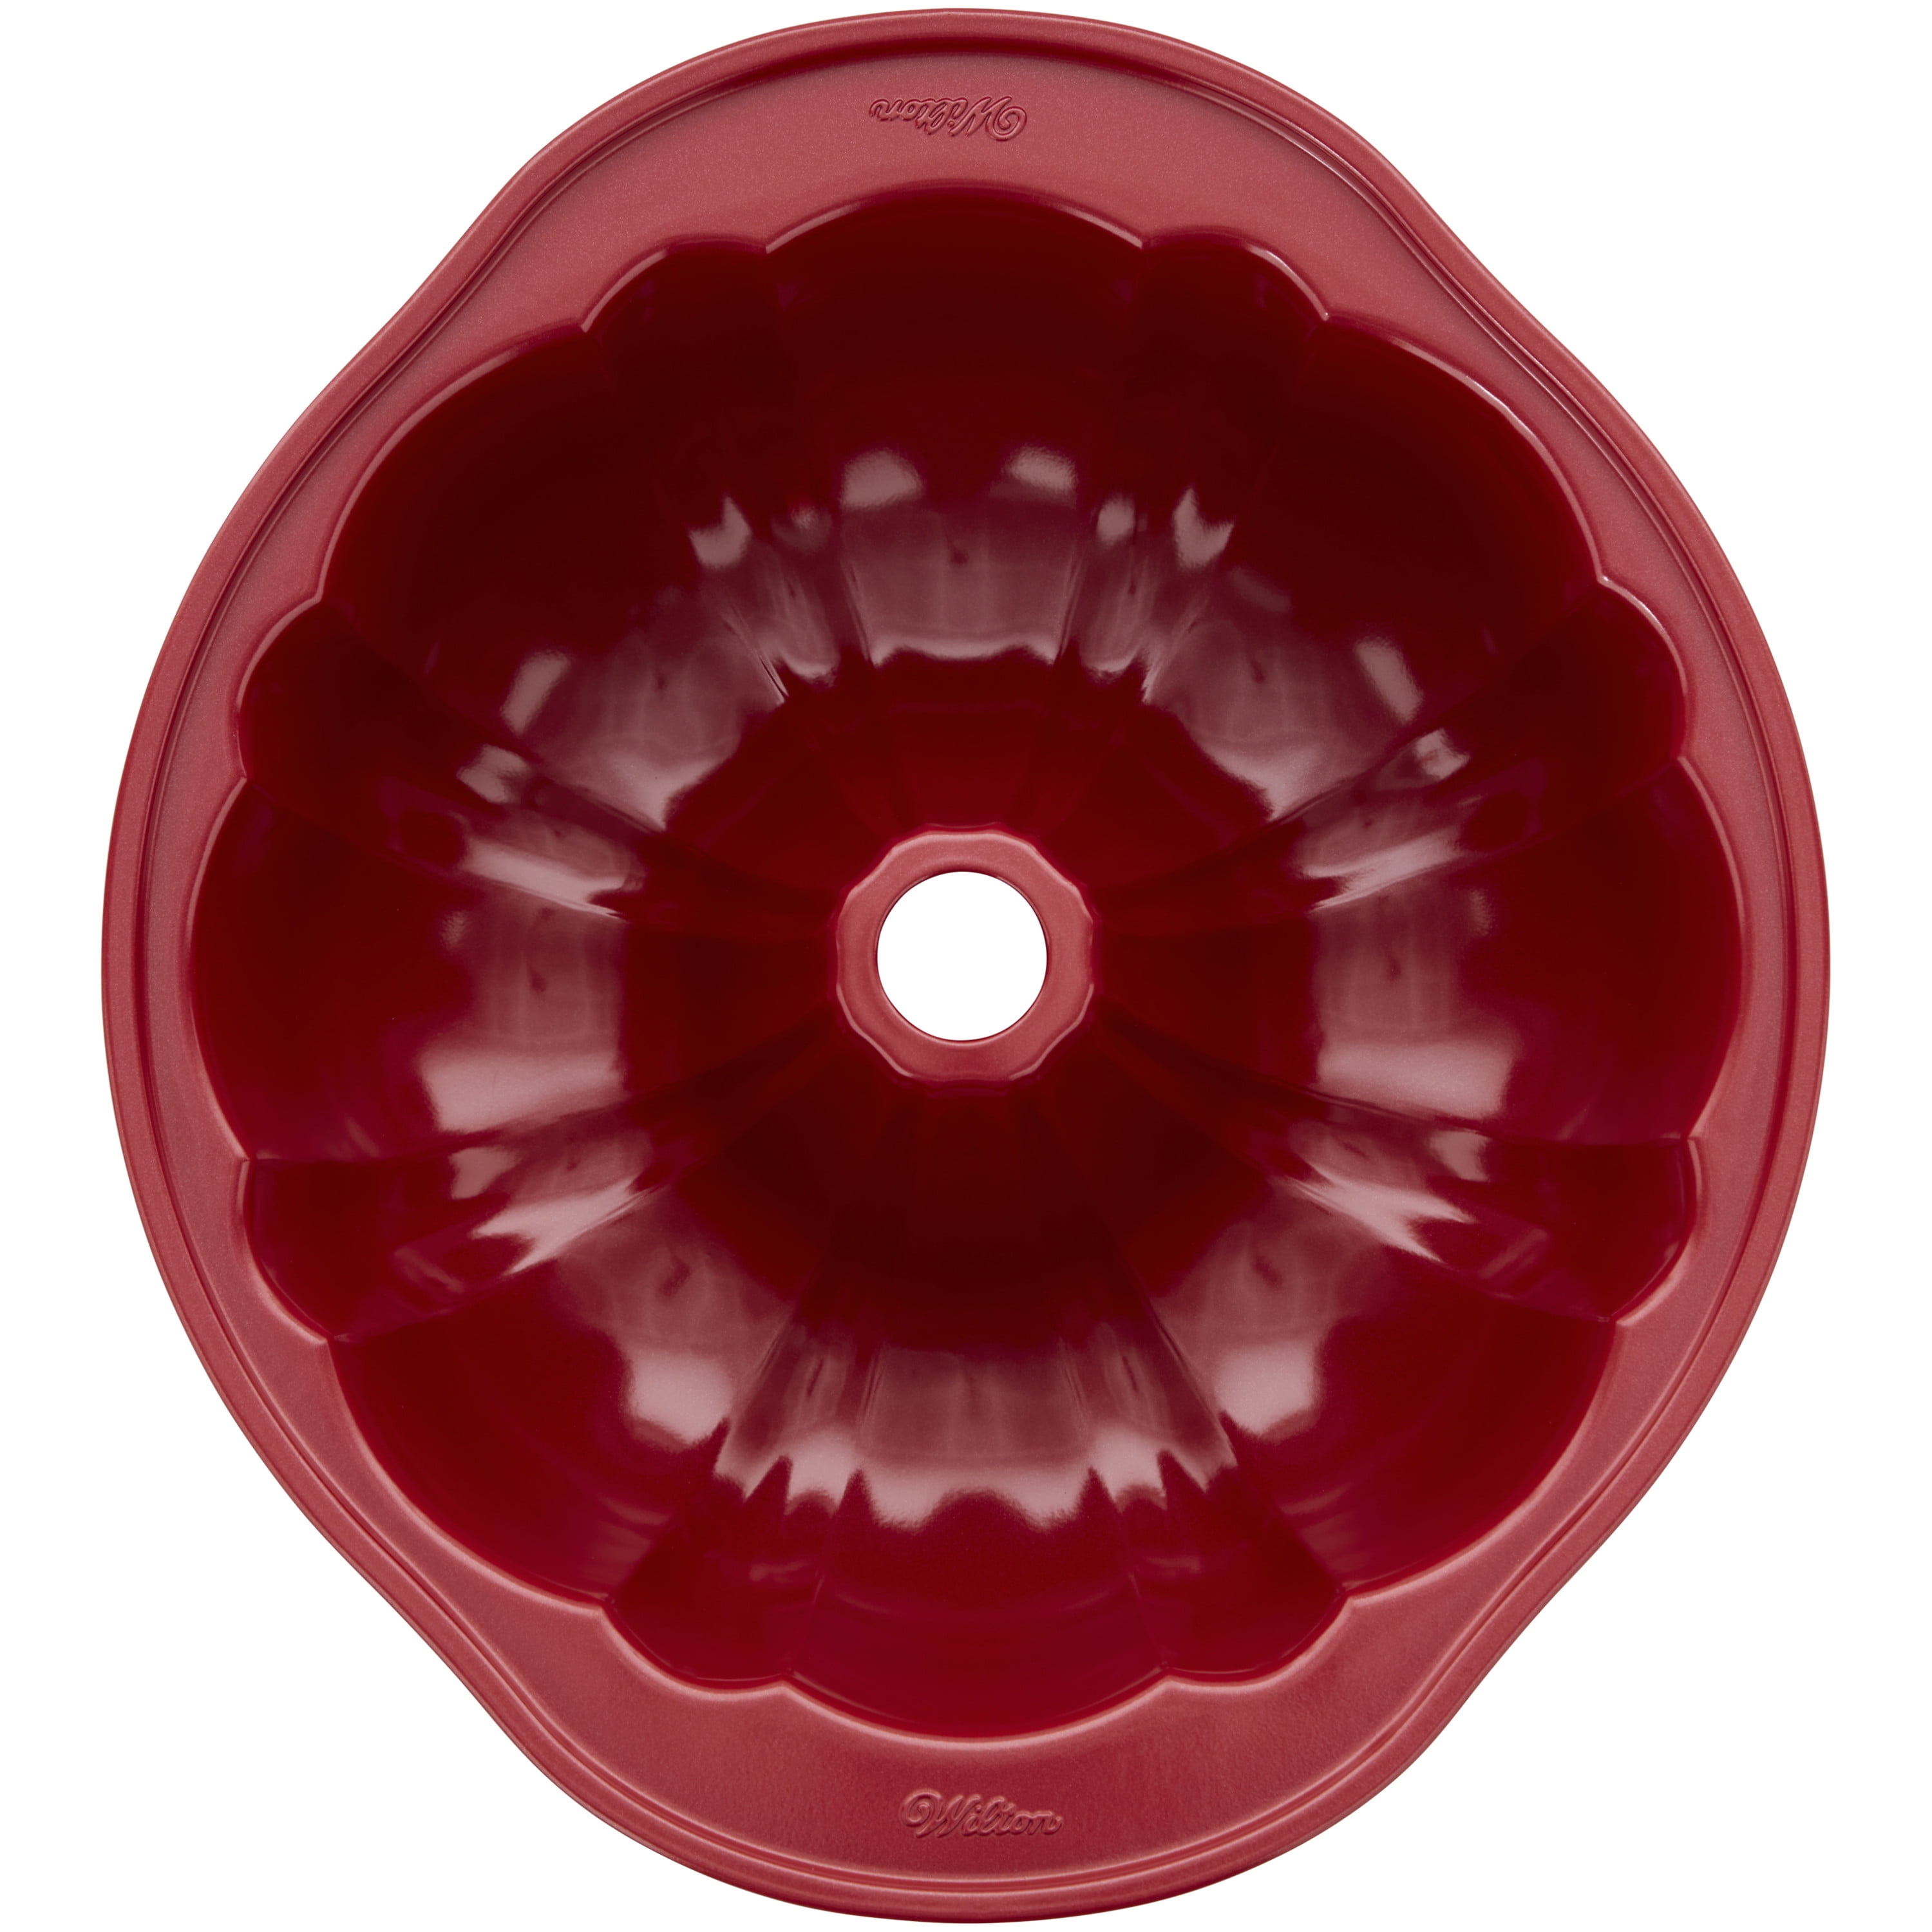 Red Heart-Shaped Non-Stick Fluted Tube Pan, 8-Inch - Wilton